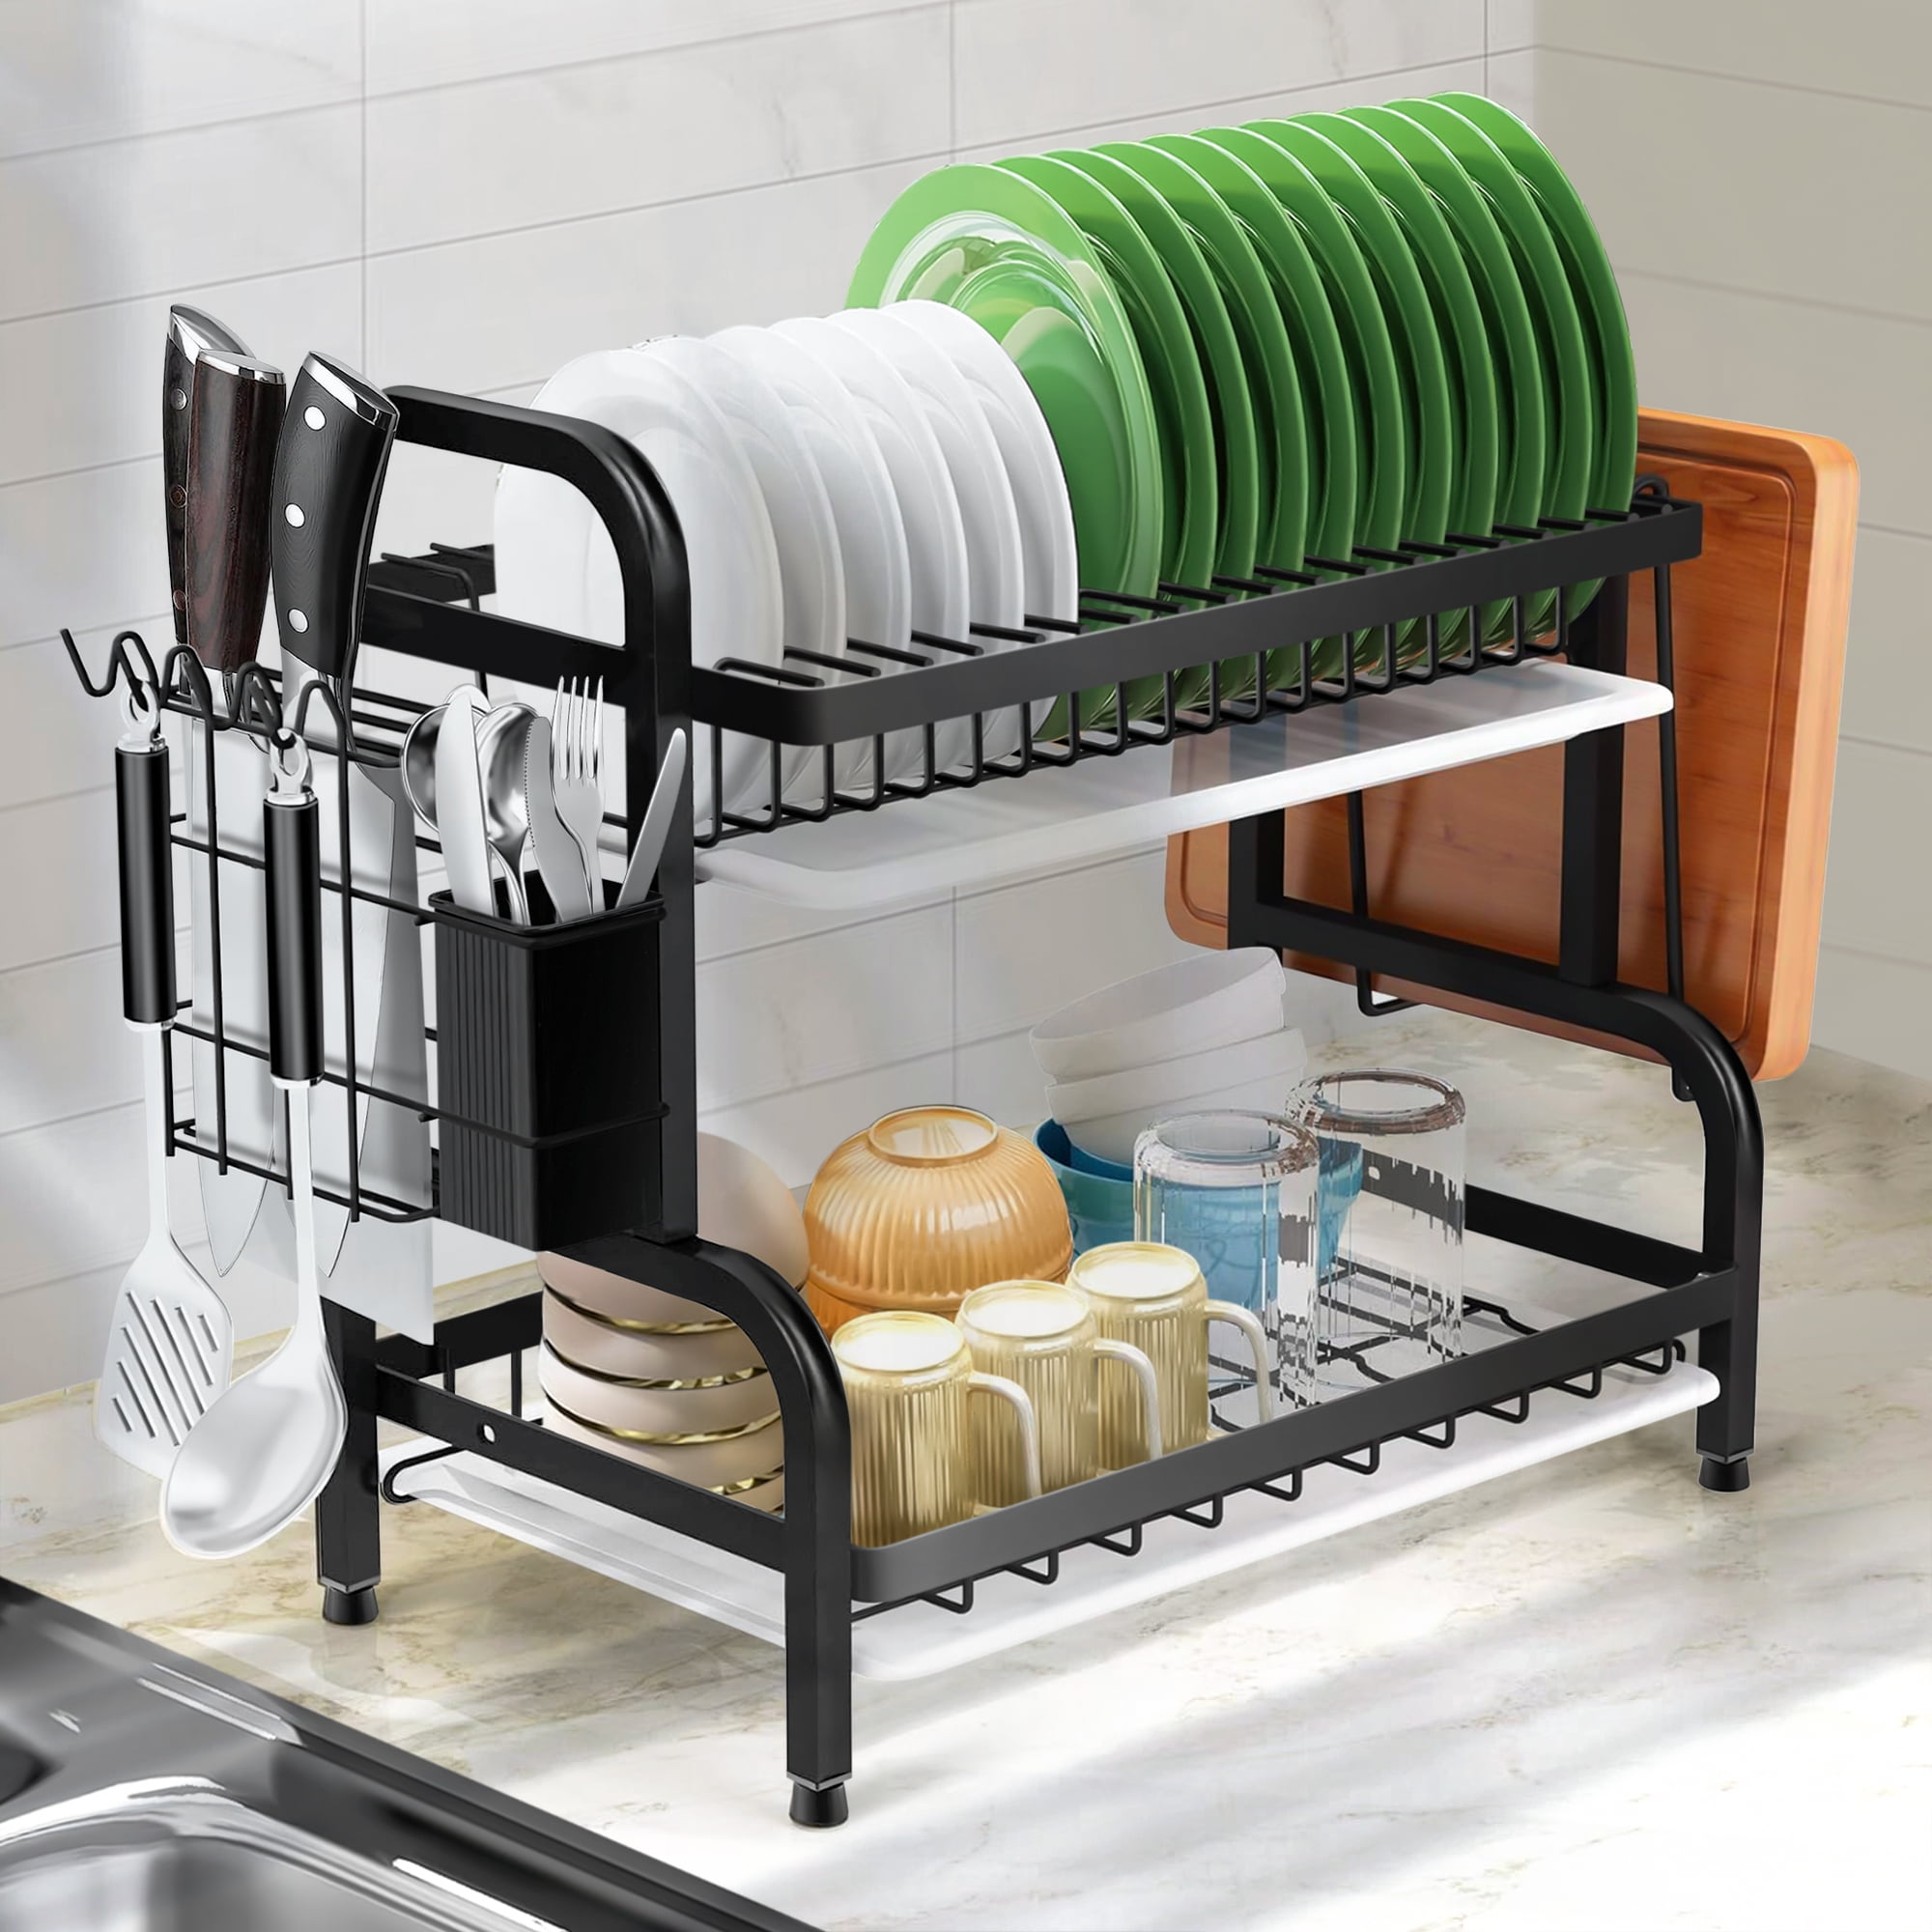 Riousery 2-Tier Dish Rack for Kitchen, Dish Drying Rack with Drain Board Tray, Compact Dishing Rack with Utensil Holder, Cutting Board Holder, Kitchen